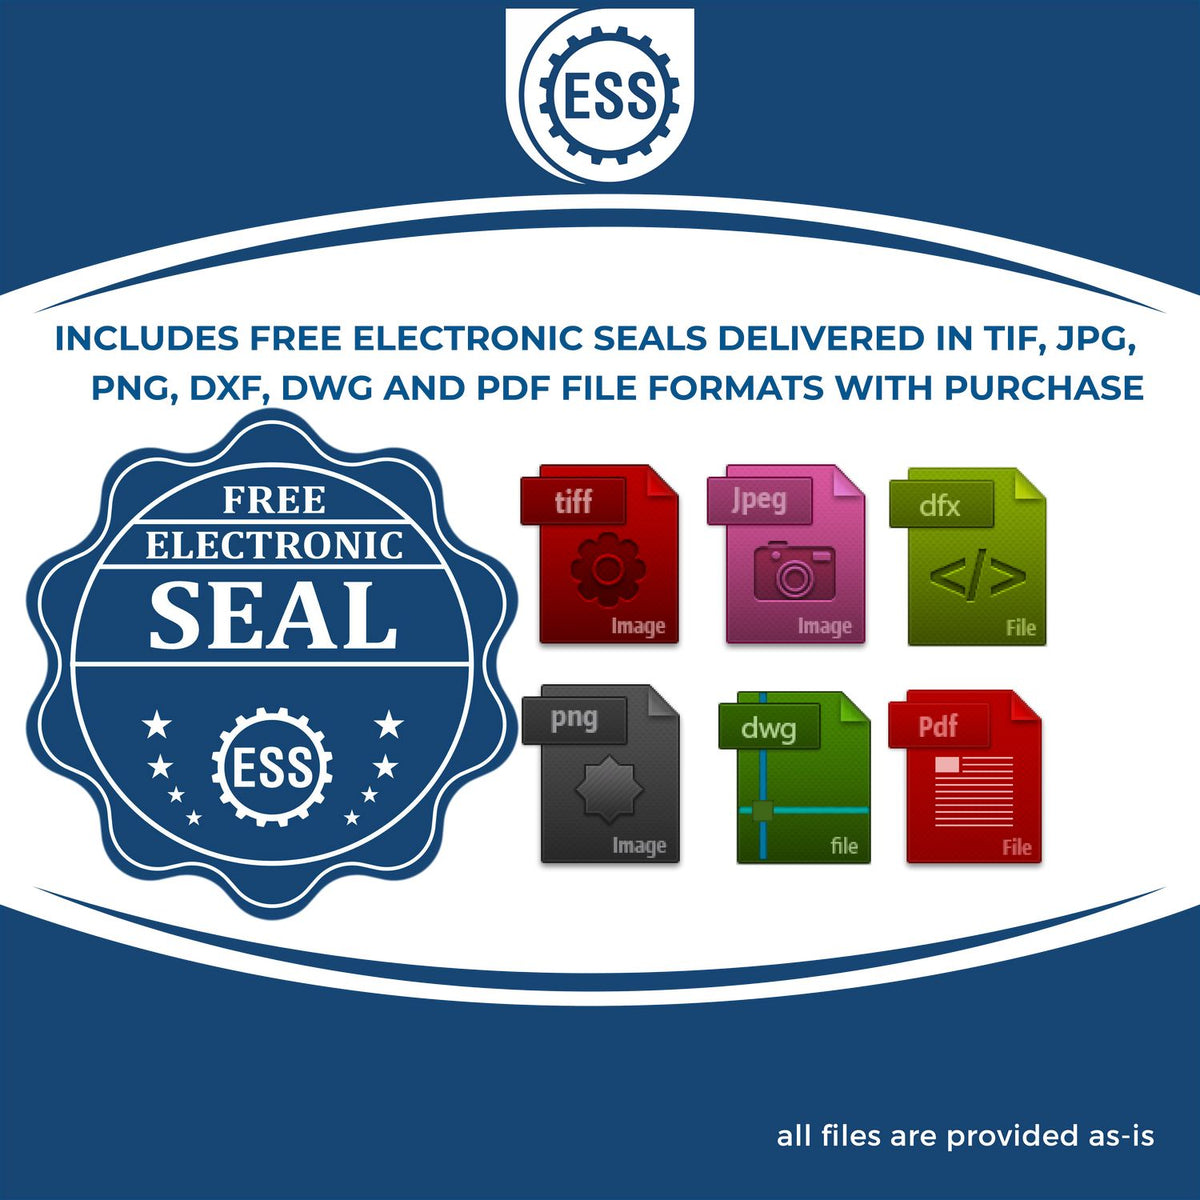 An infographic for the free electronic seal for the Slim Pre-Inked Missouri Architect Seal Stamp illustrating the different file type icons such as DXF, DWG, TIF, JPG and PNG.